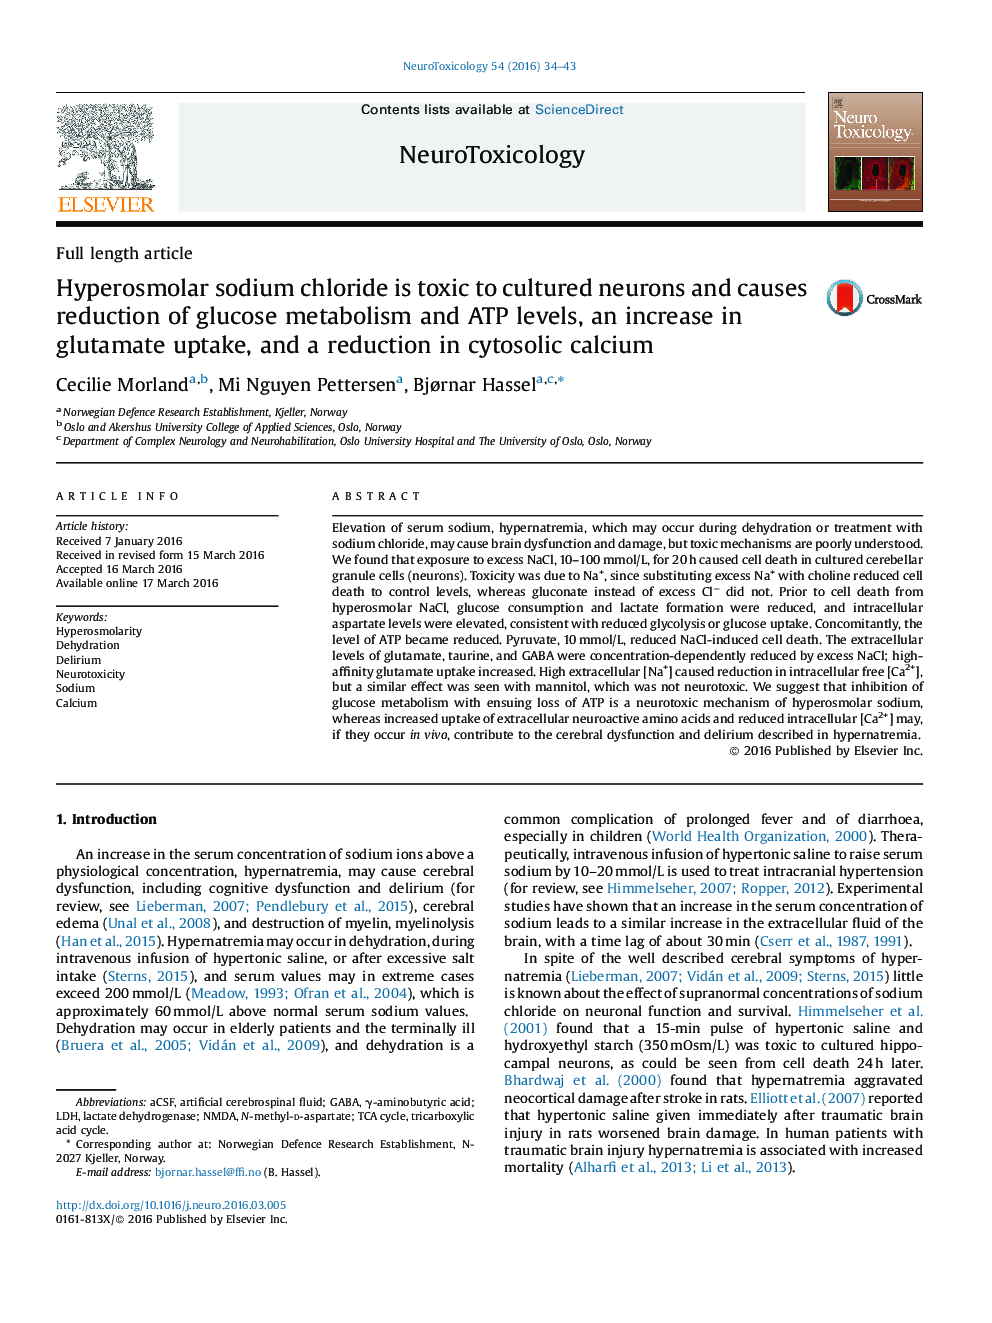 Hyperosmolar sodium chloride is toxic to cultured neurons and causes reduction of glucose metabolism and ATP levels, an increase in glutamate uptake, and a reduction in cytosolic calcium